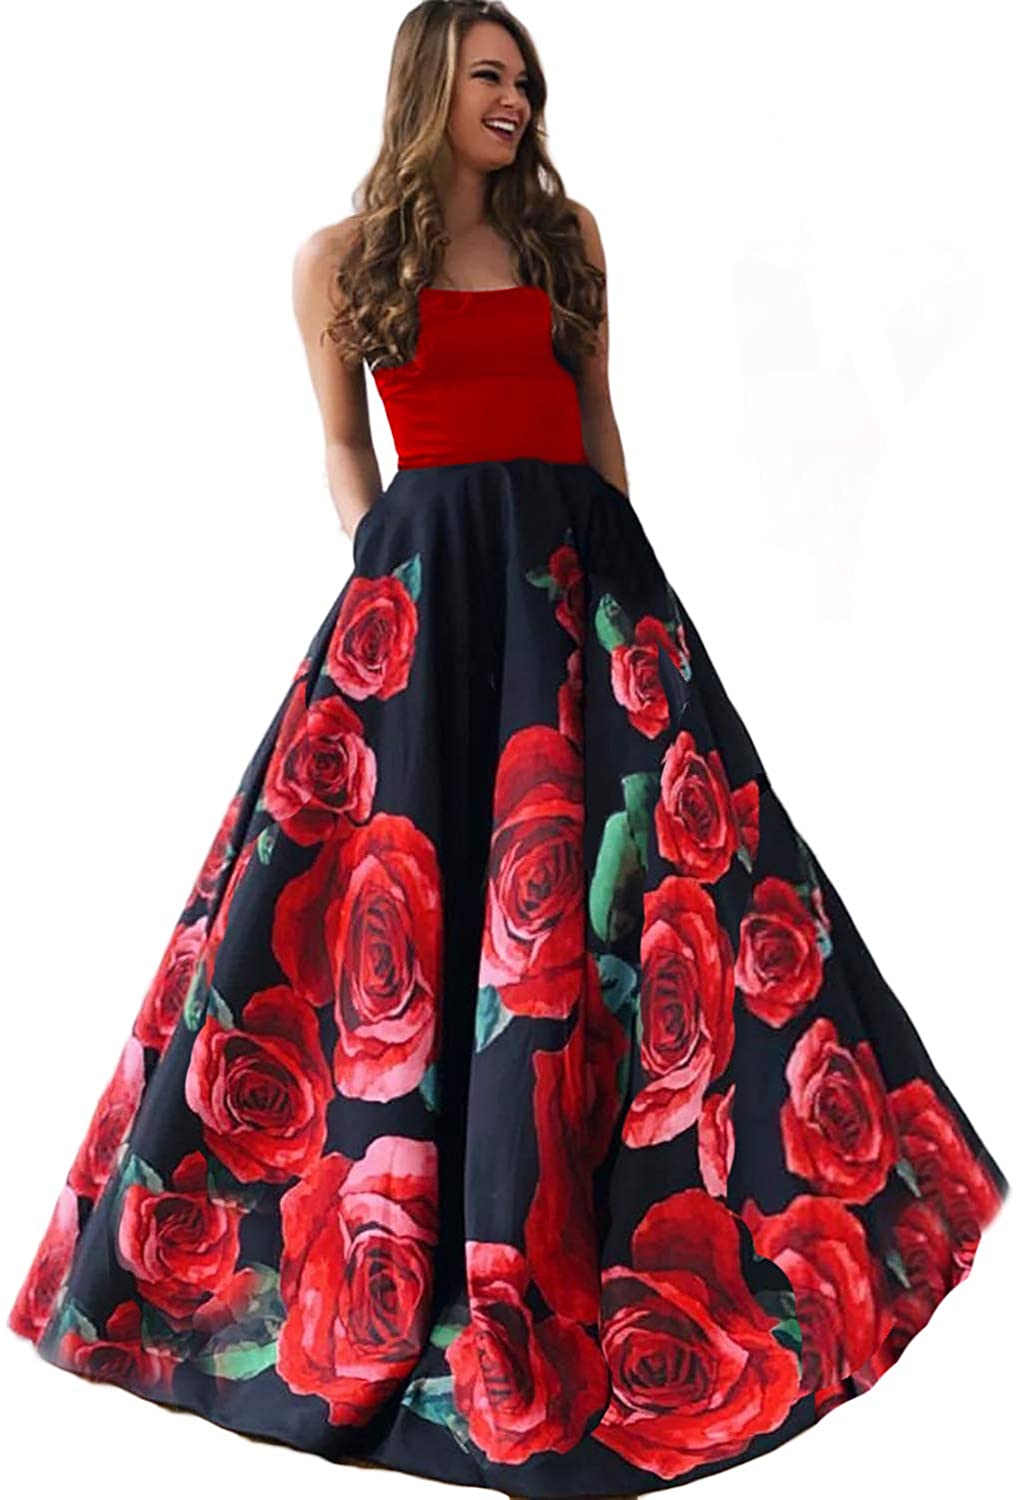 Price:$74.99    DarlingU Women's Prom Evening Dresses Pockets Formal Party Gown  Clothing